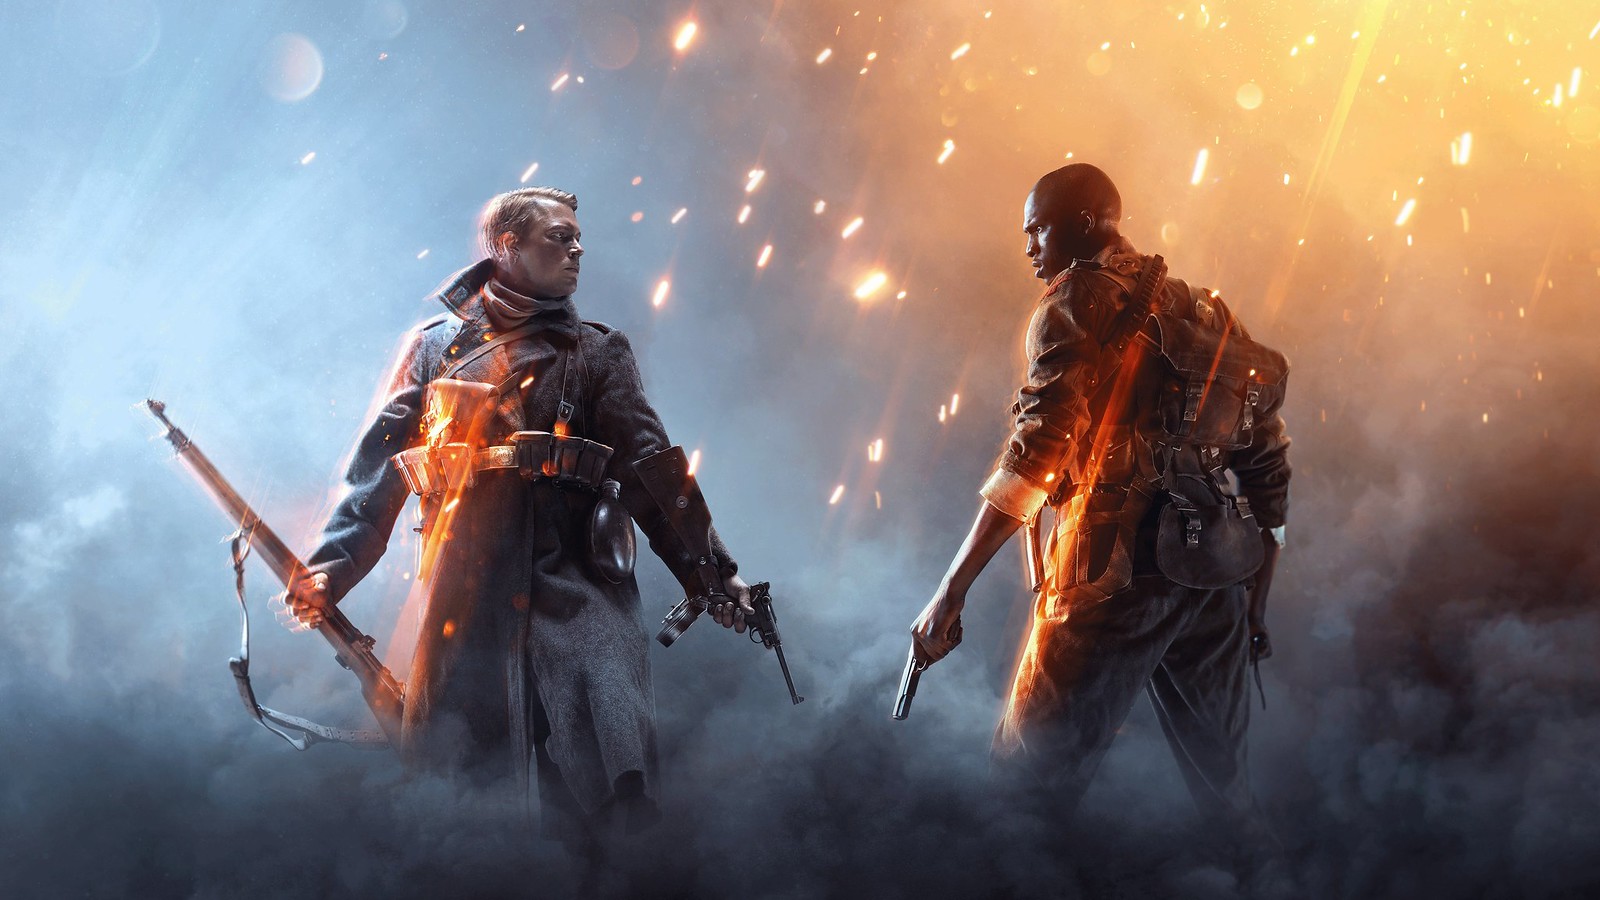 bf1 hd wallpaper,action adventure game,movie,fictional character,screenshot,pc game